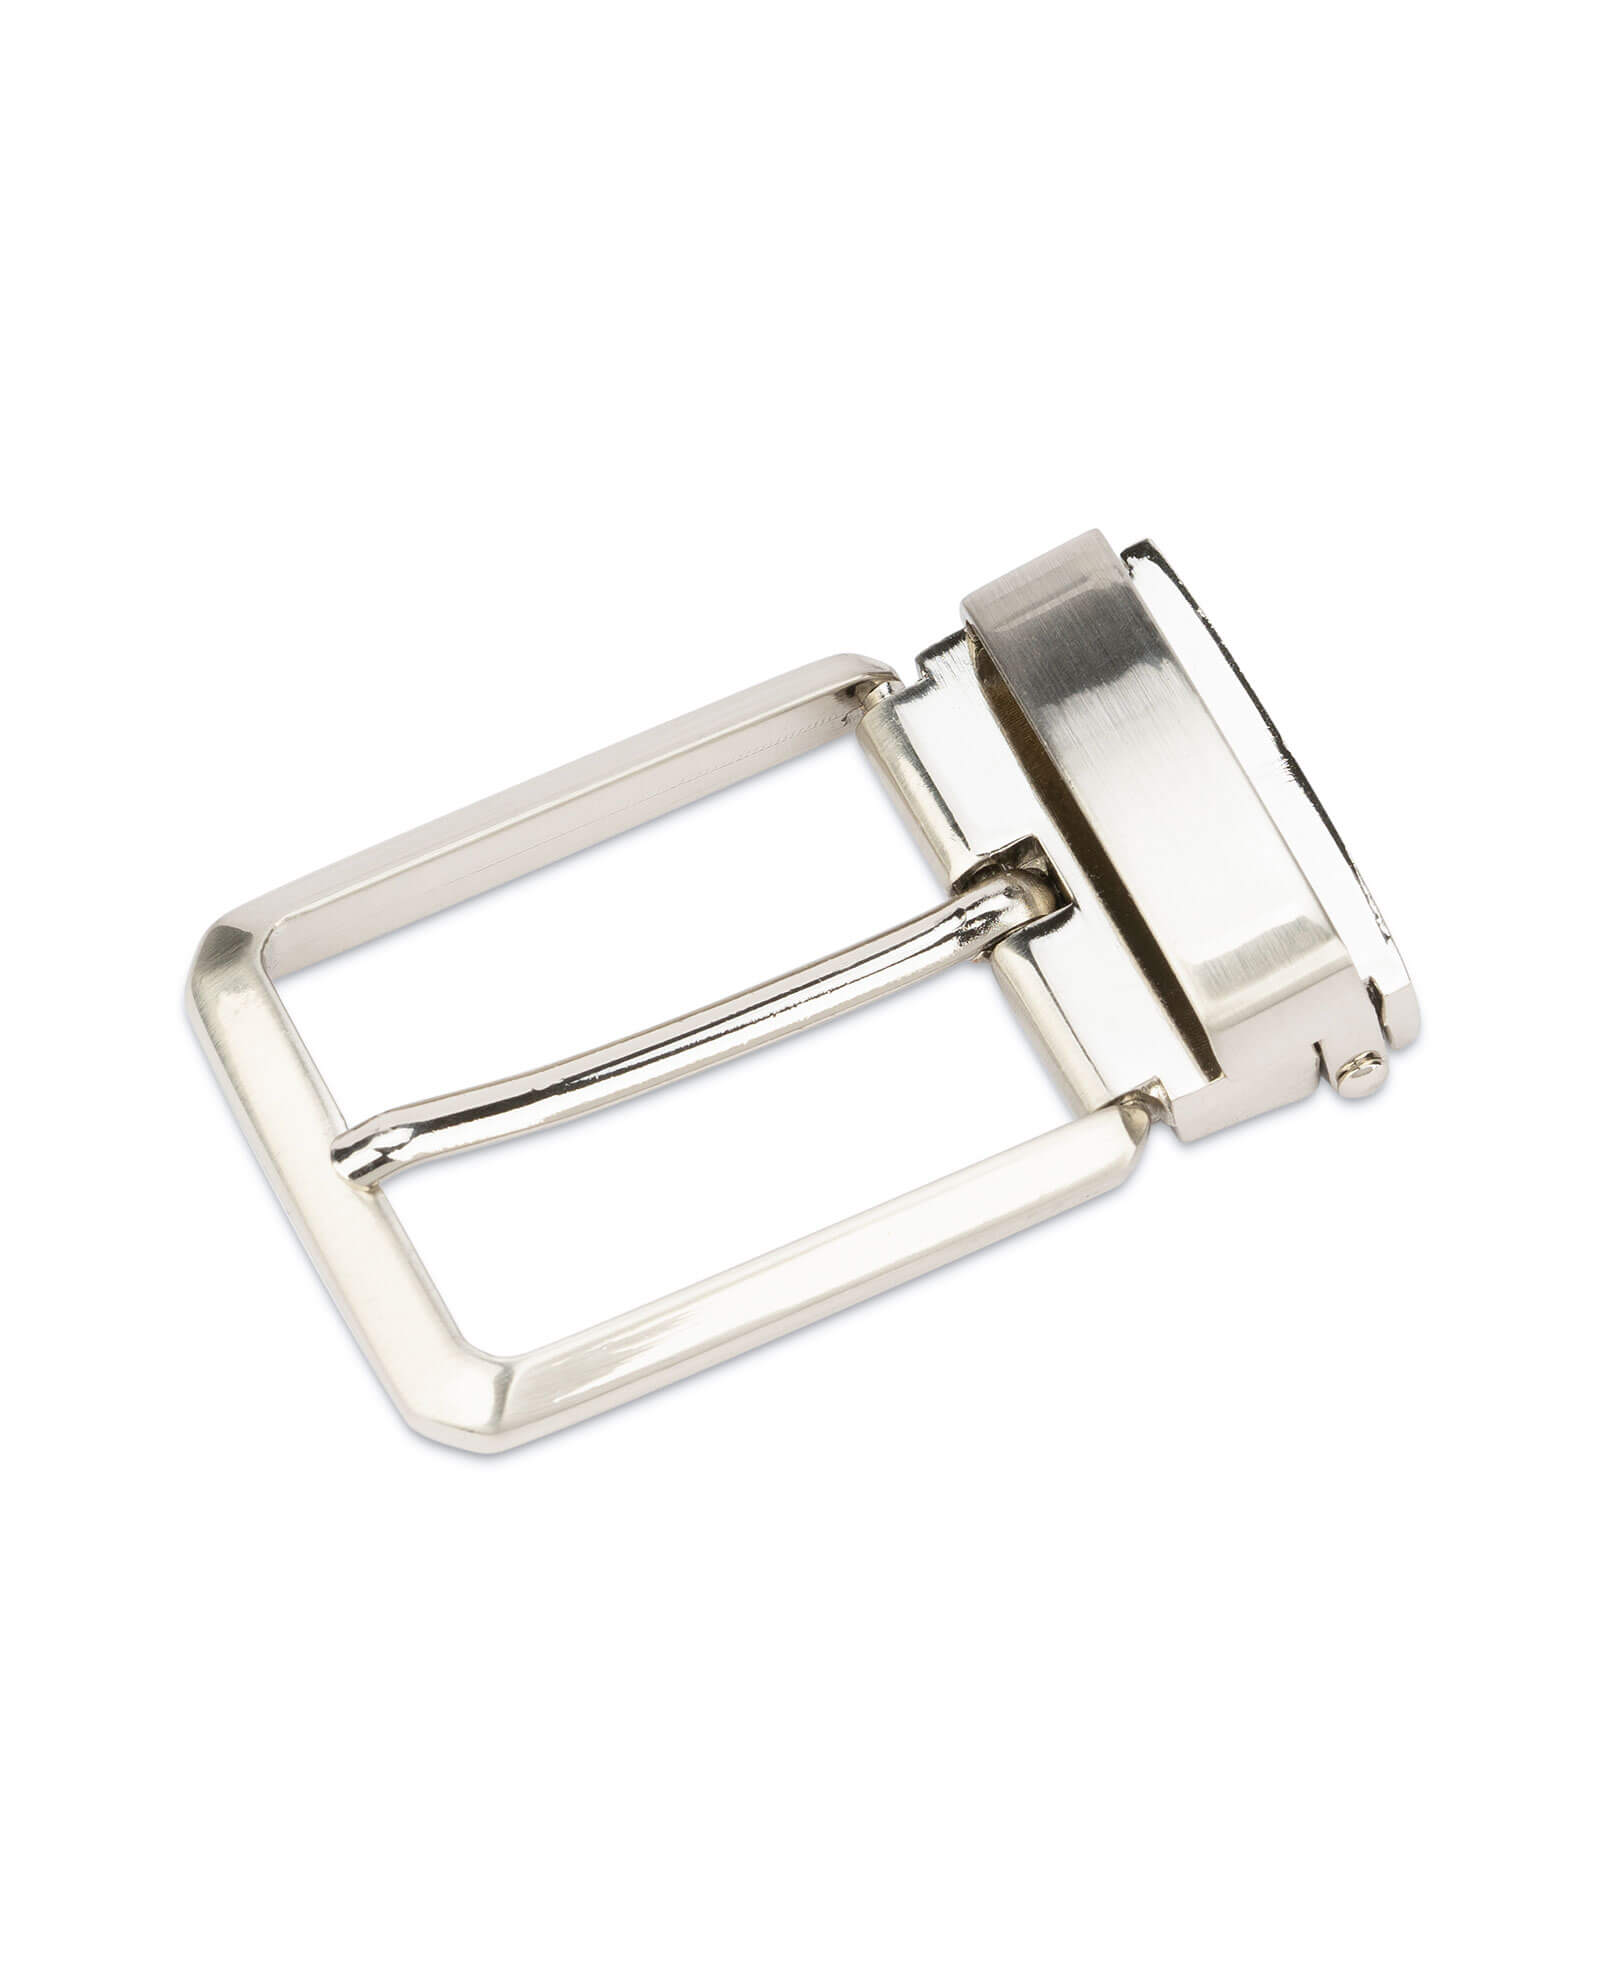 Replacement Mens Buckle for Belts | 30 mm Nickel